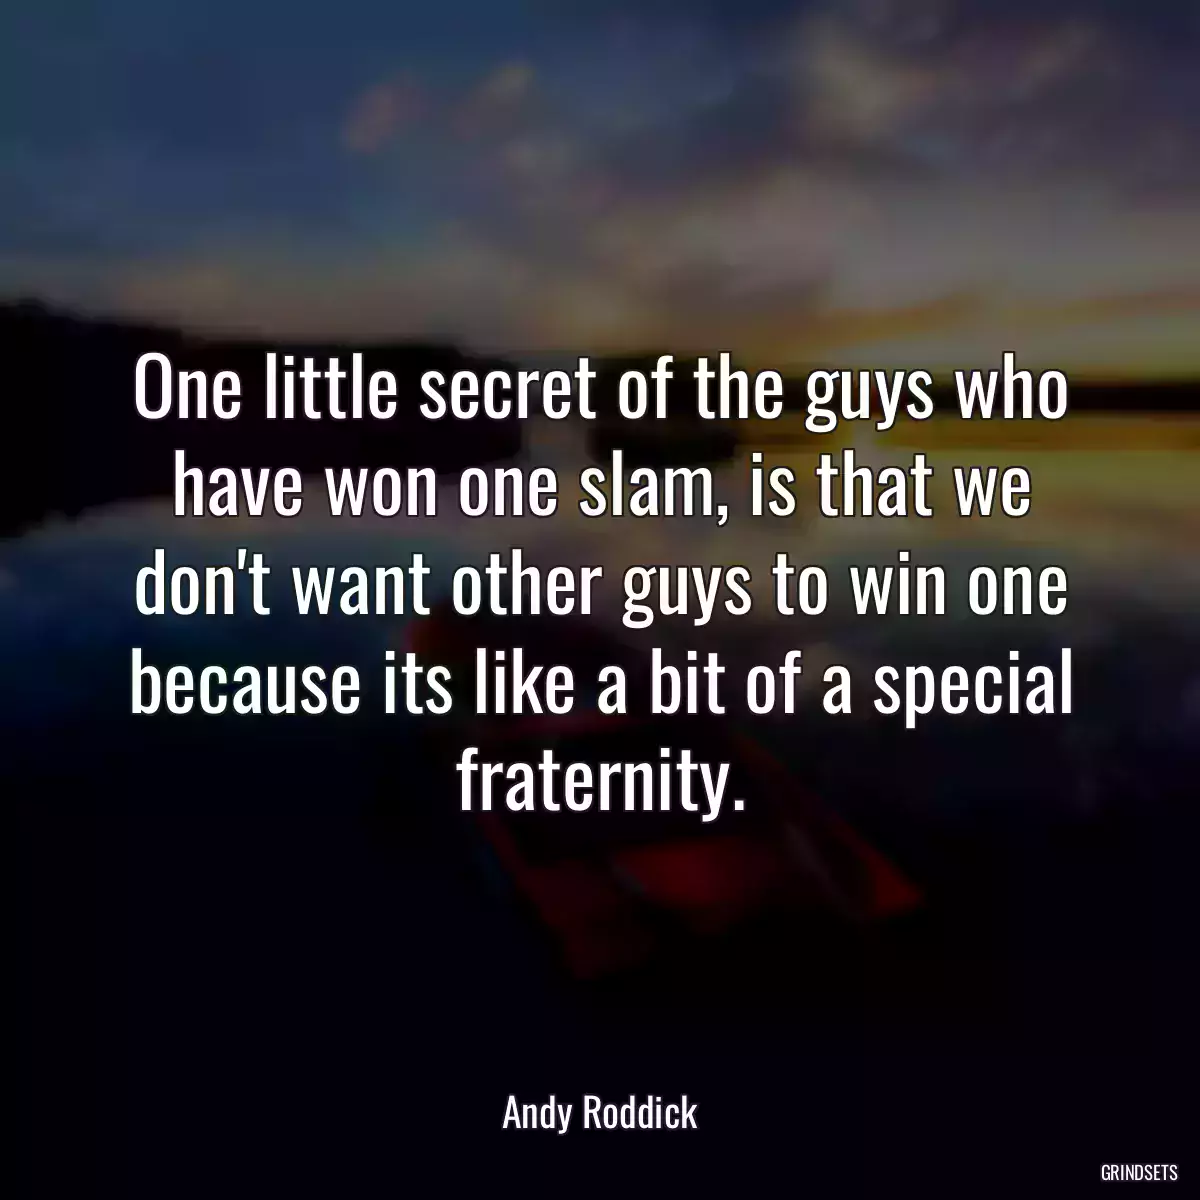 One little secret of the guys who have won one slam, is that we don\'t want other guys to win one because its like a bit of a special fraternity.